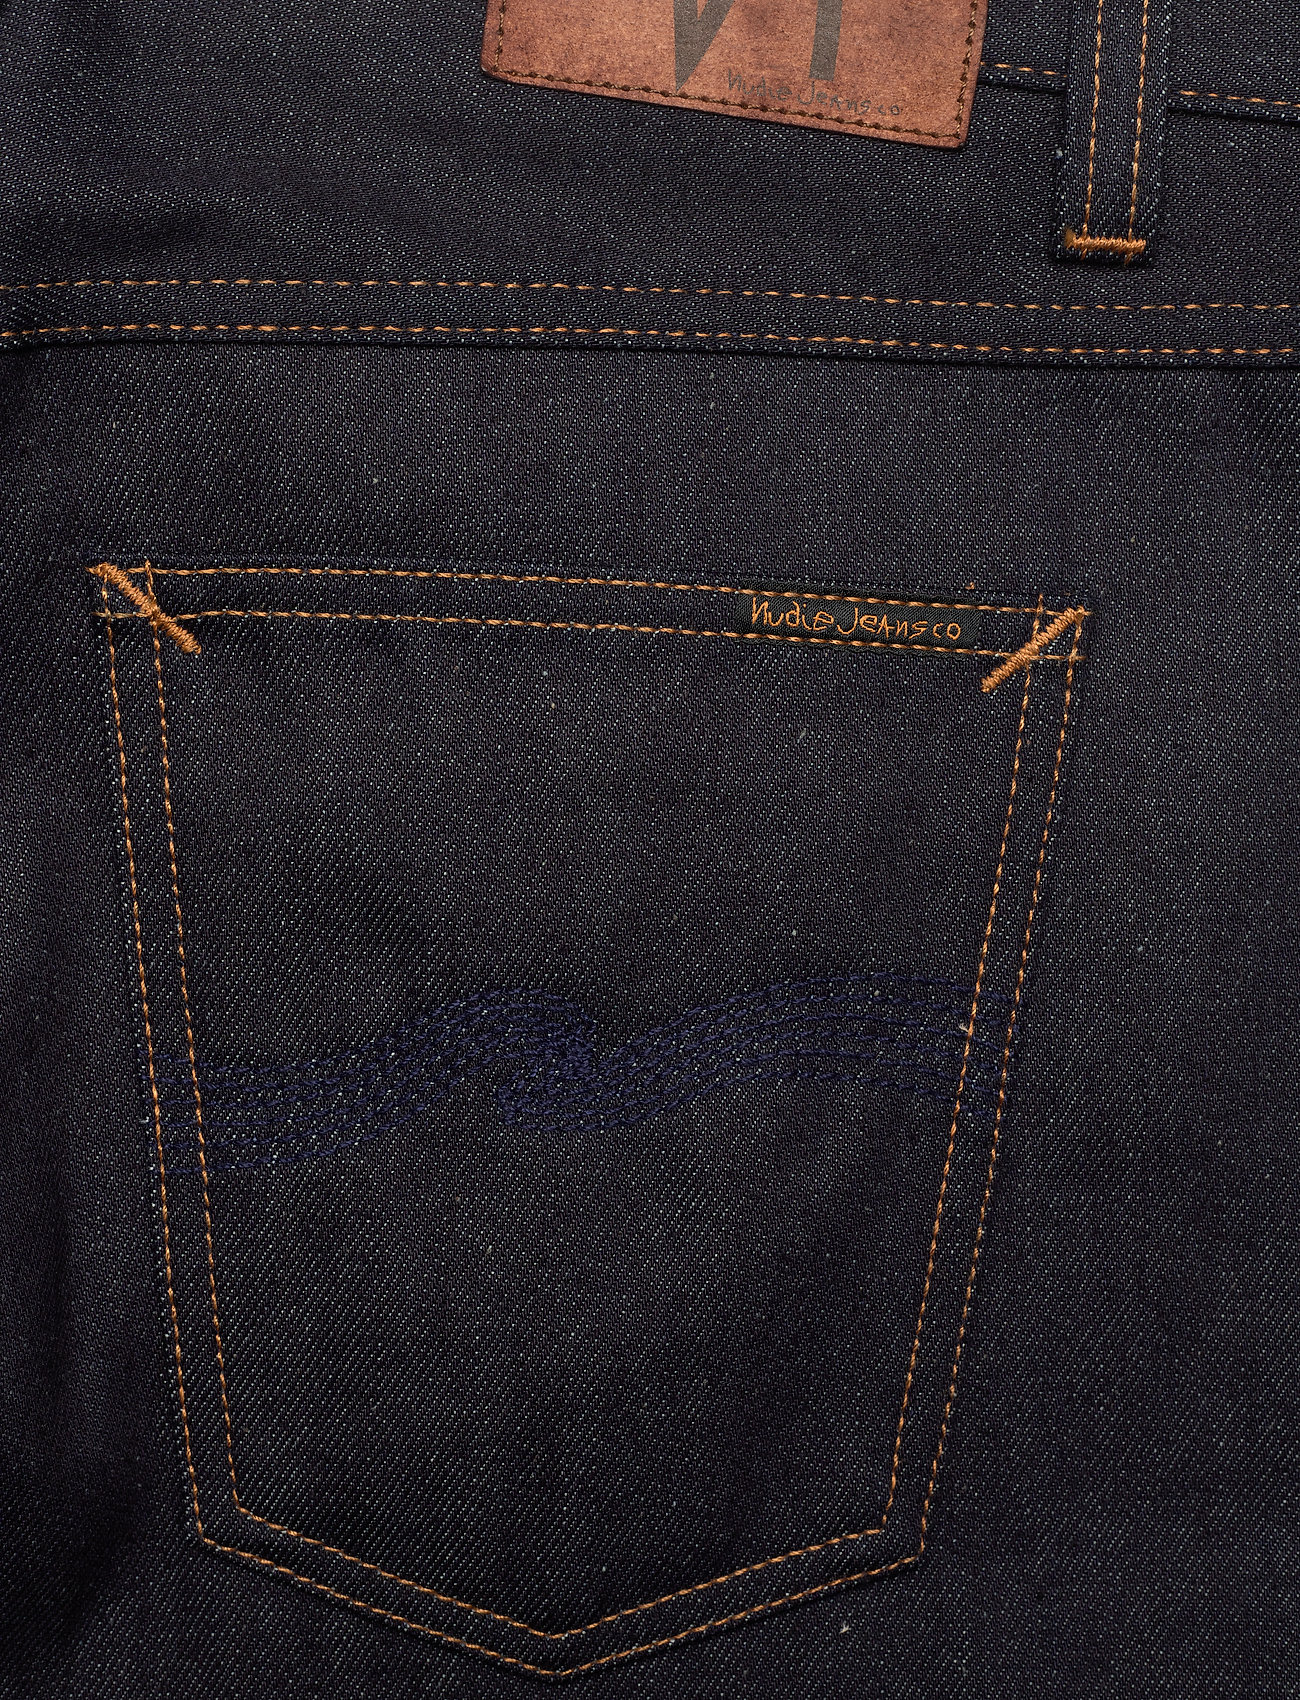 Nudie Jeans - Gritty Jackson - regular jeans - dry maze selvag - 11